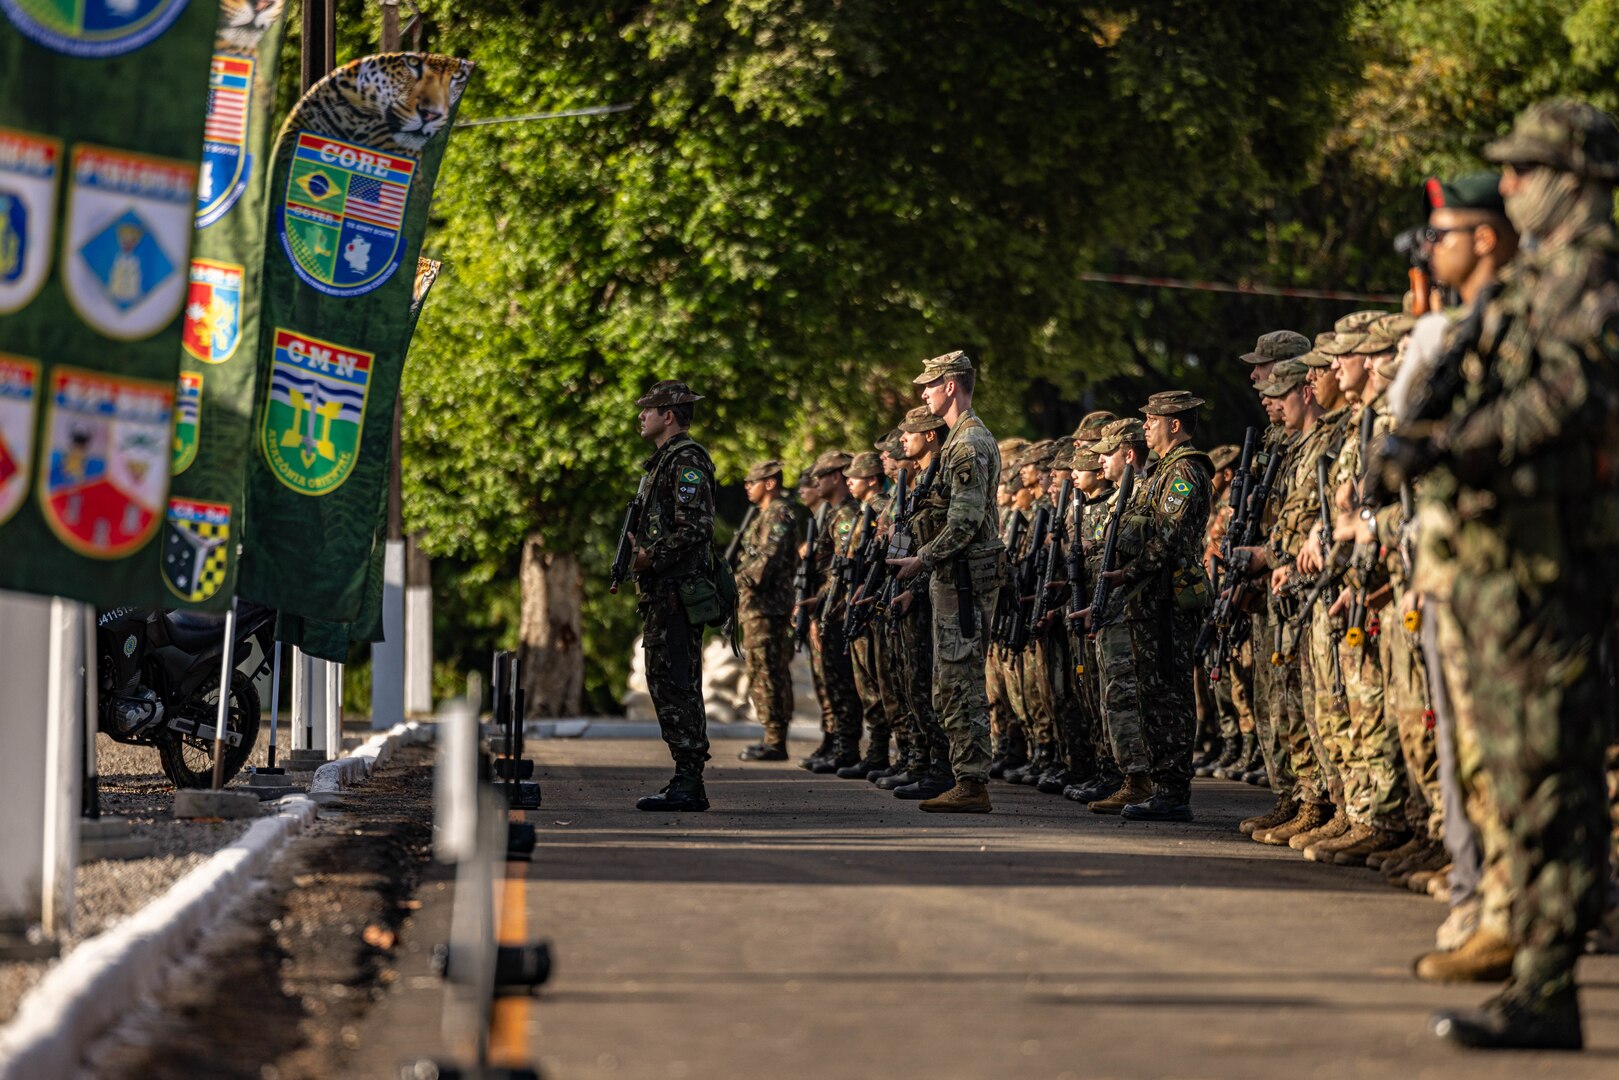 Exercise Complete, Partnership Continues: Closing ceremony marks the end of SV24